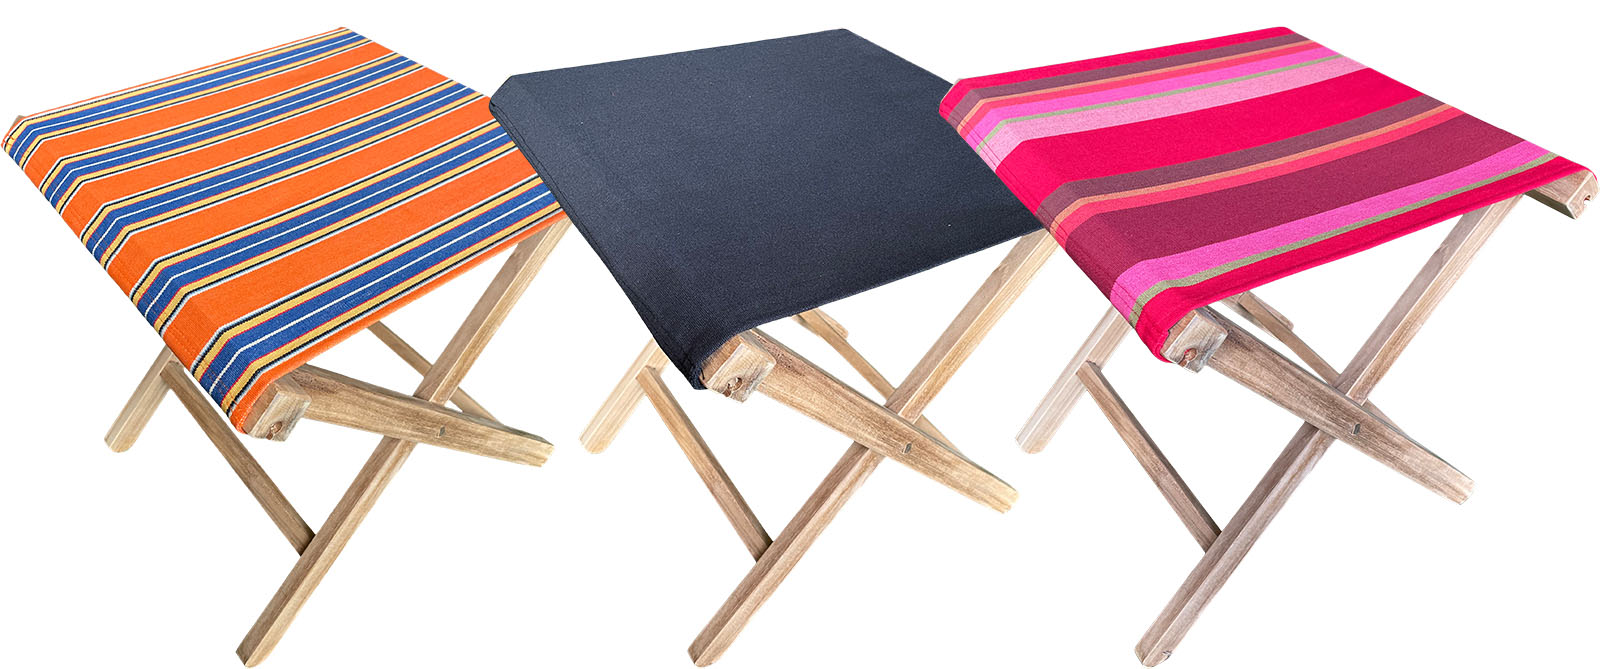 Portable Folding Wooden Stools with Striped Seats 